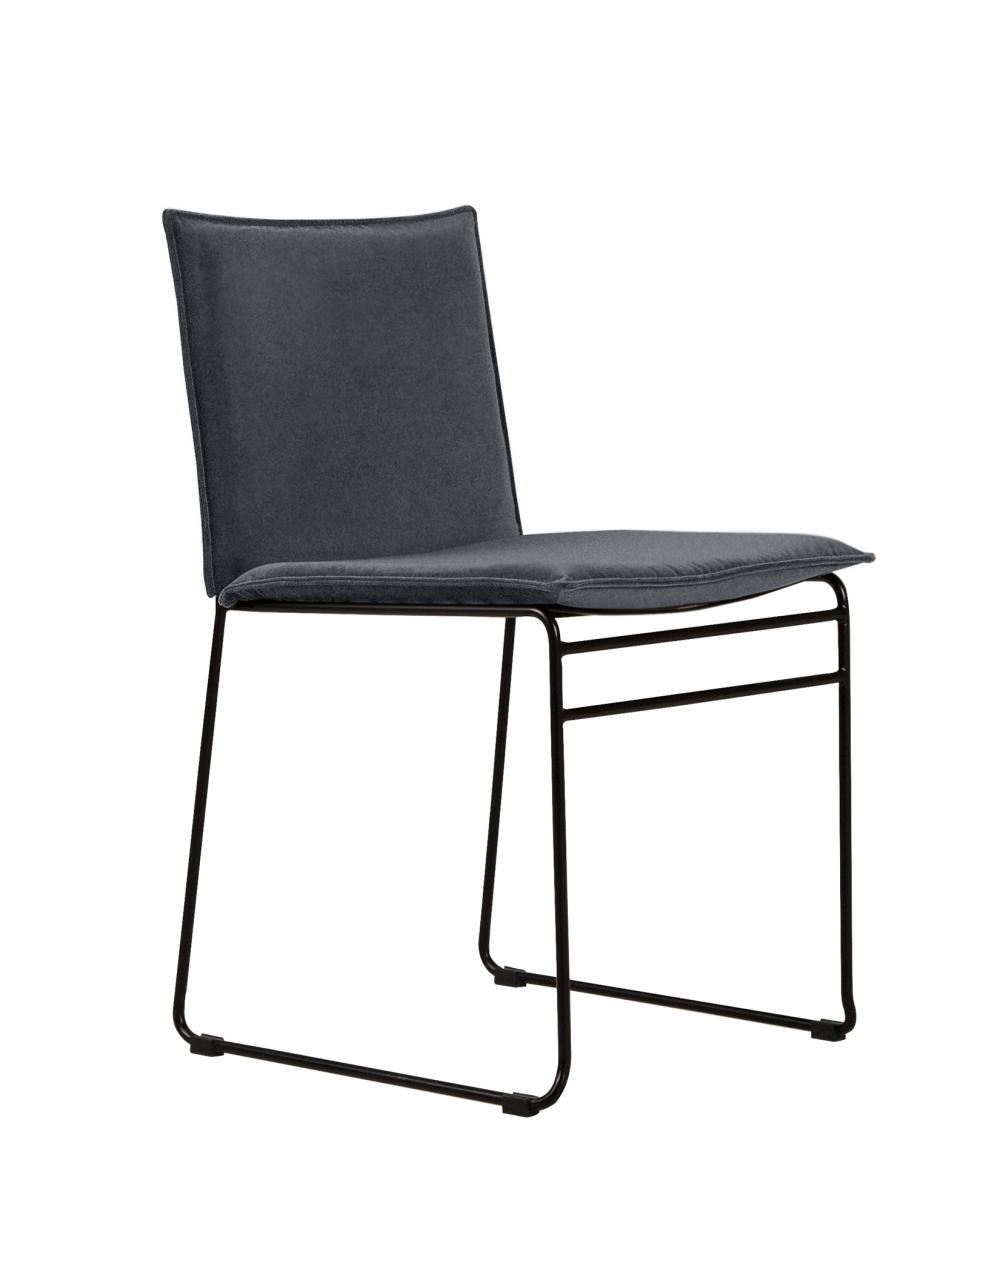 Kyst Dining Chair Outdoor White Steel Chair Light Grey